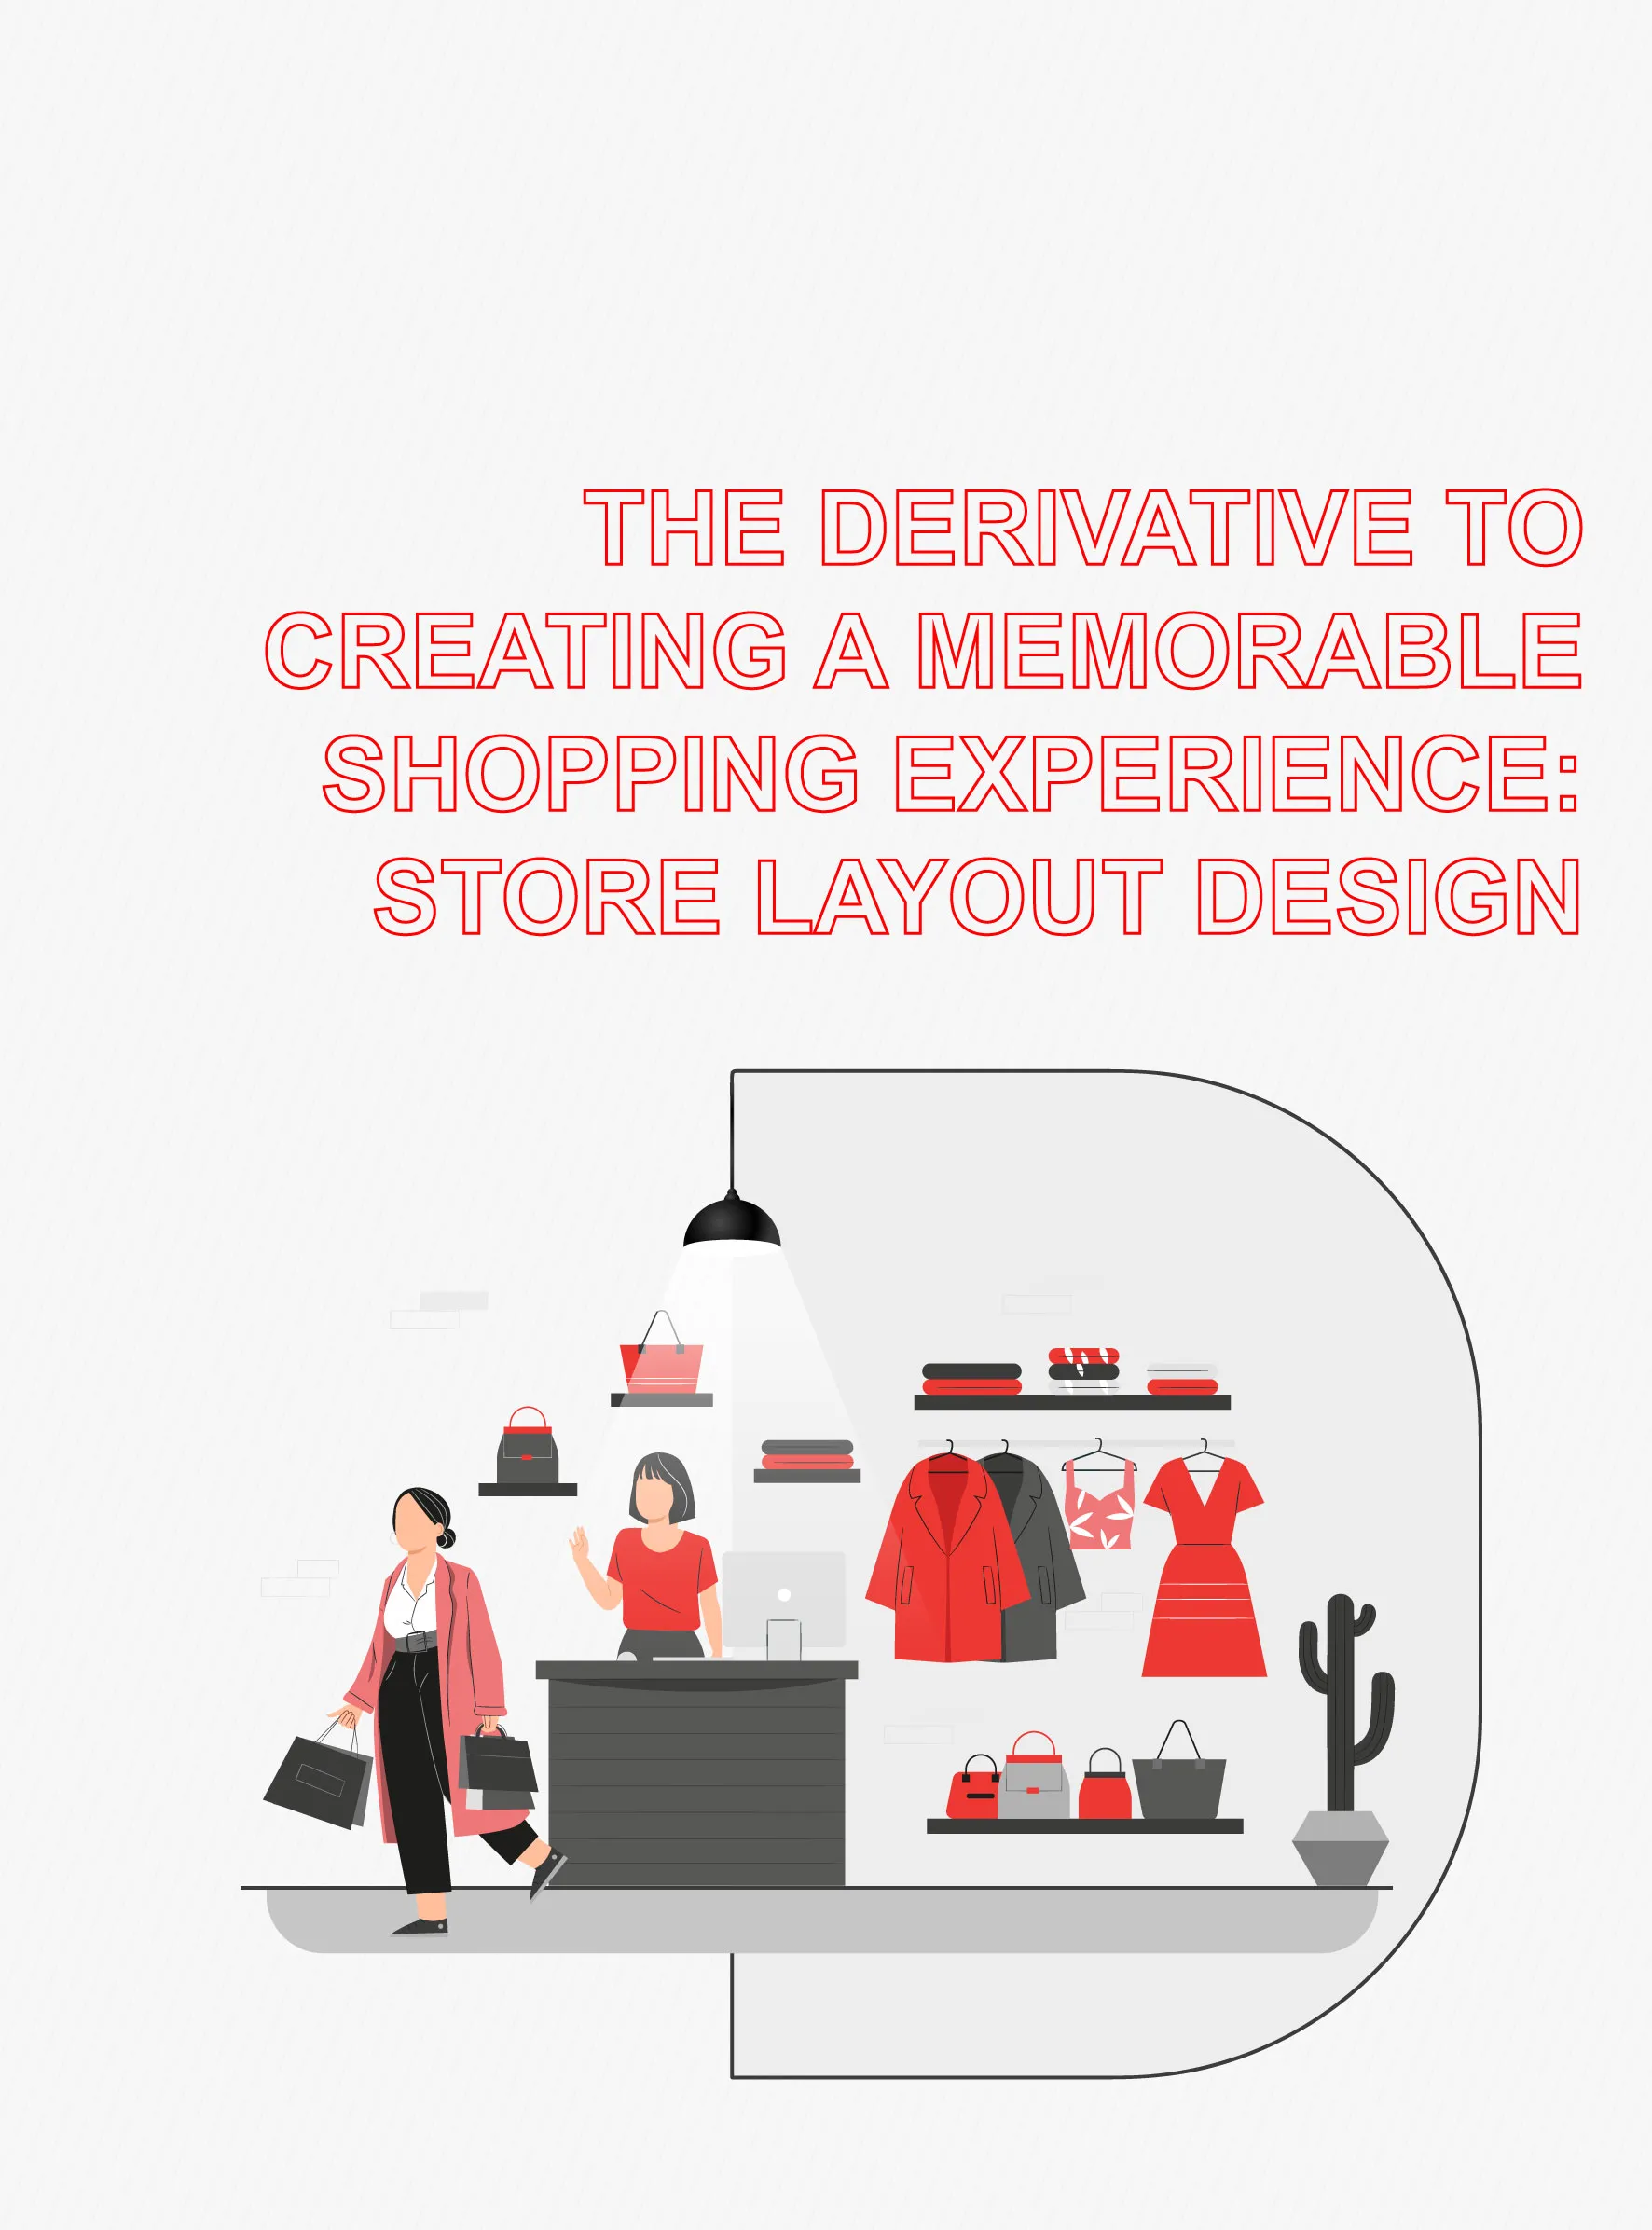 The derivative to creating a memorable shopping experience: store layout design